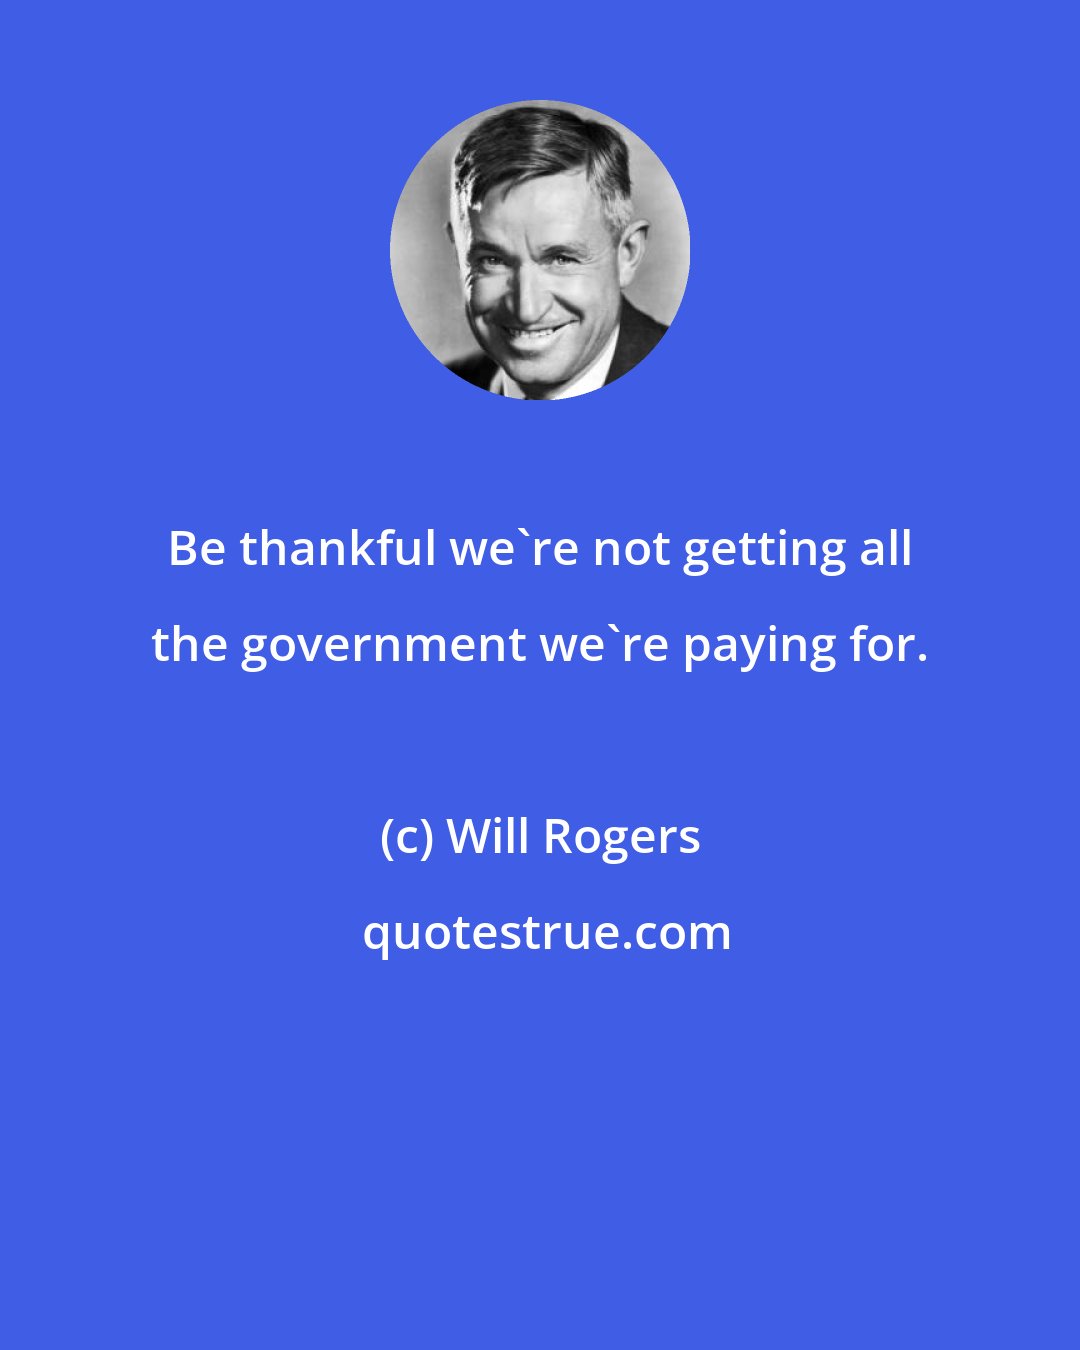 Will Rogers: Be thankful we're not getting all the government we're paying for.